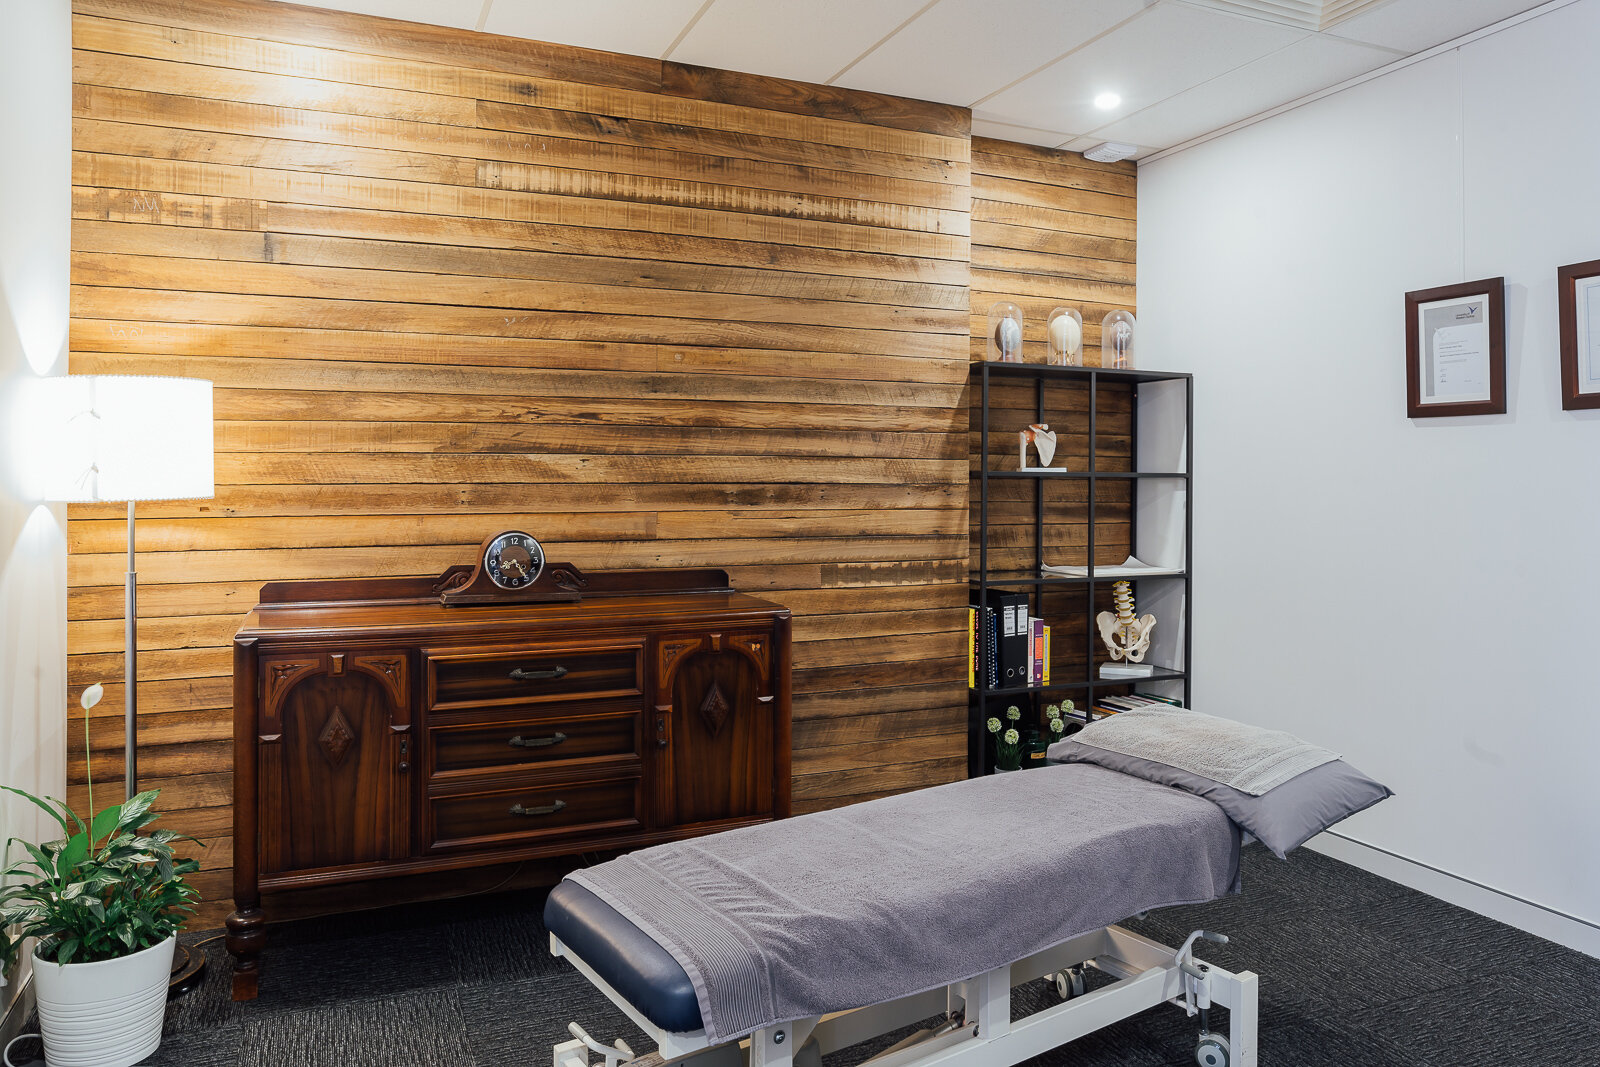 Recycled timber cladding wall with massage chair in the room